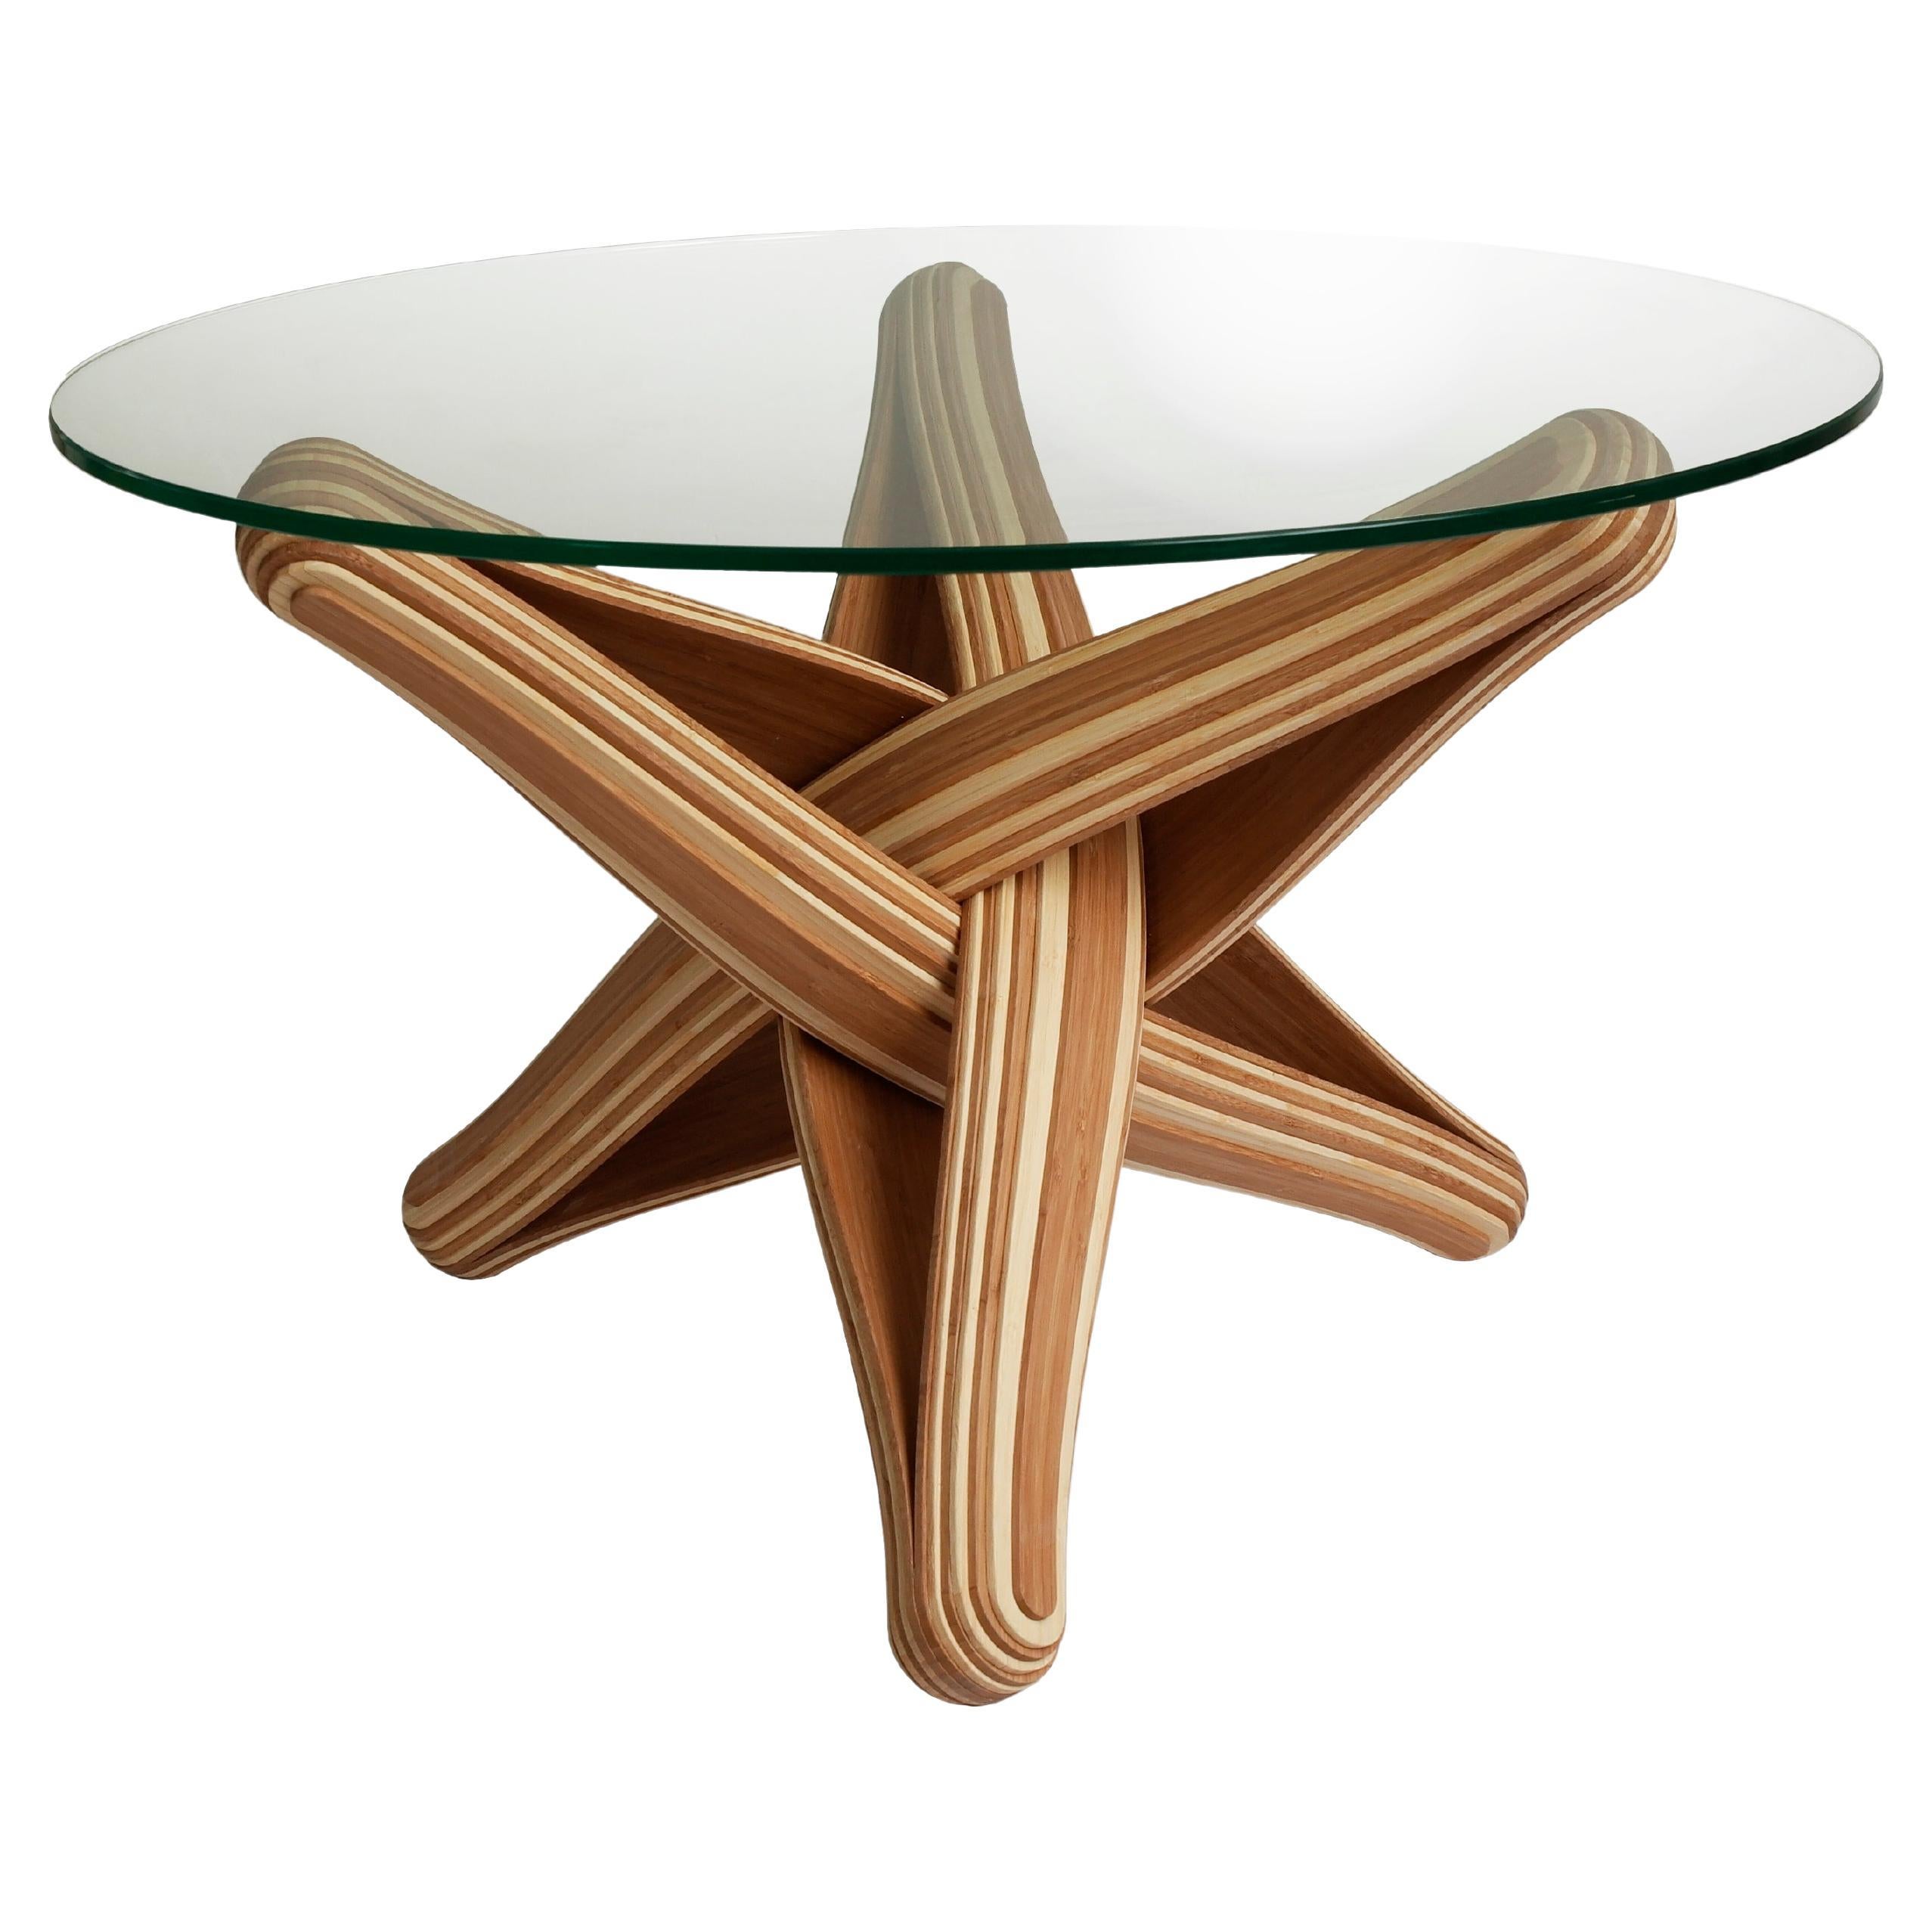 Caramel / naturel bamboo Coffee Table with Glass Top